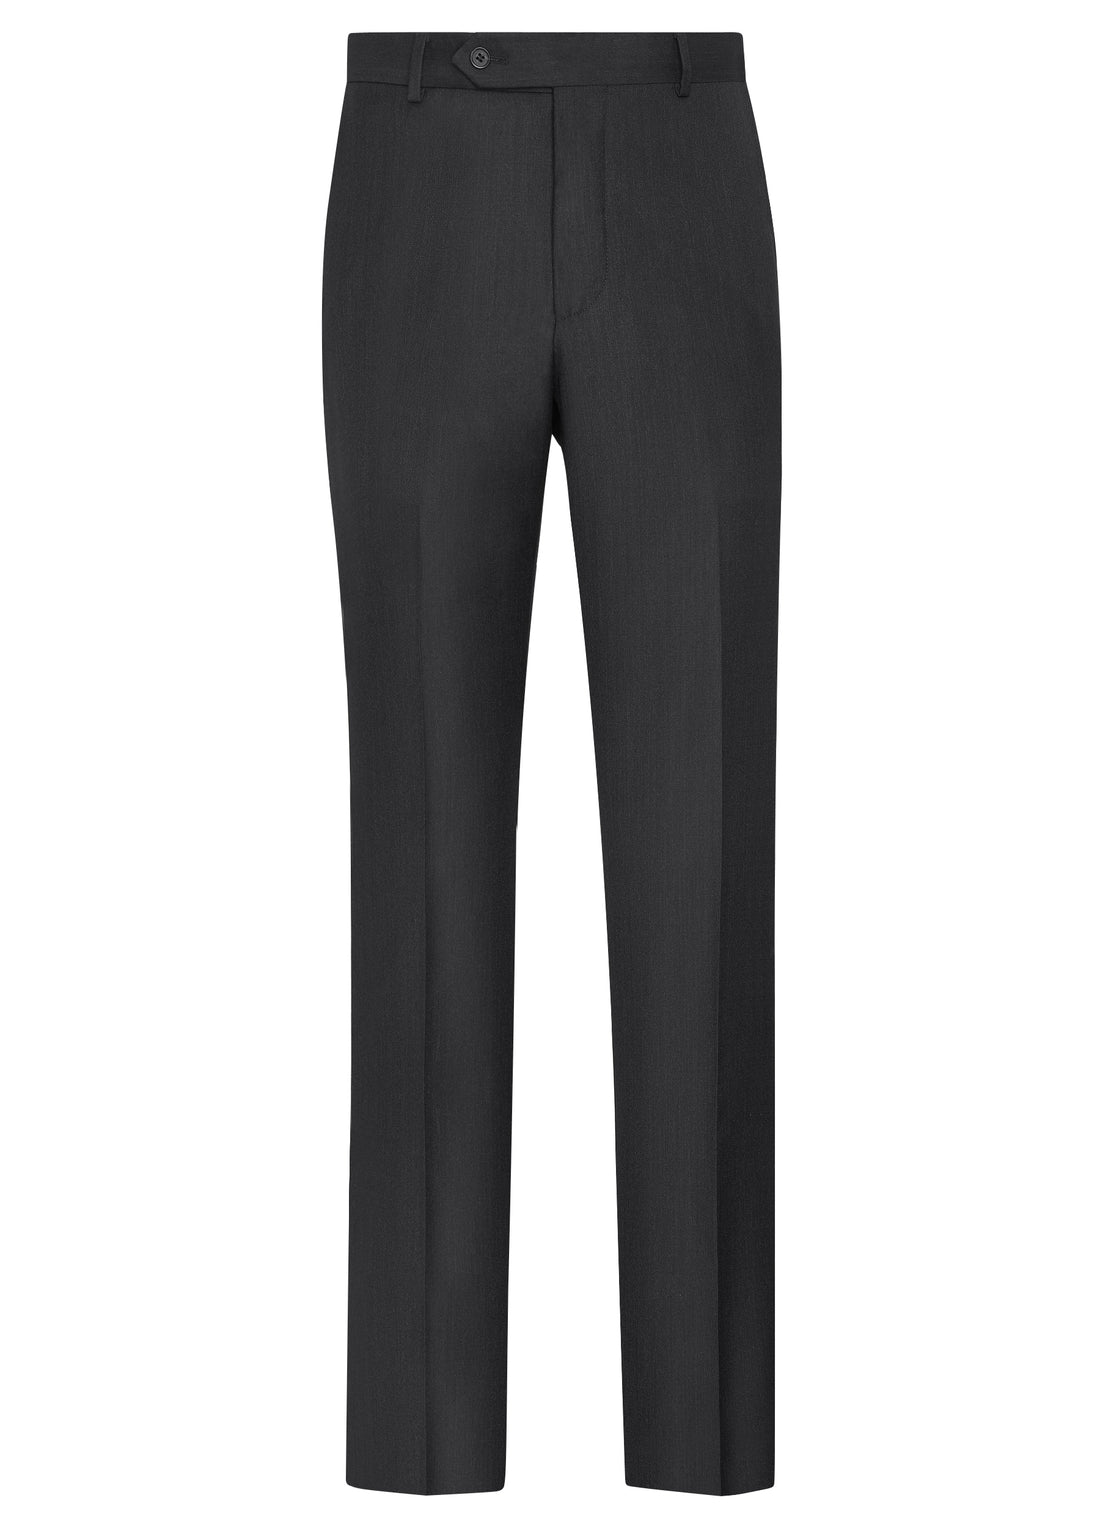 Charcoal Flat Fit Trousers - Classic Fit Charcoal Flat Fit Trousers - Classic Fit 